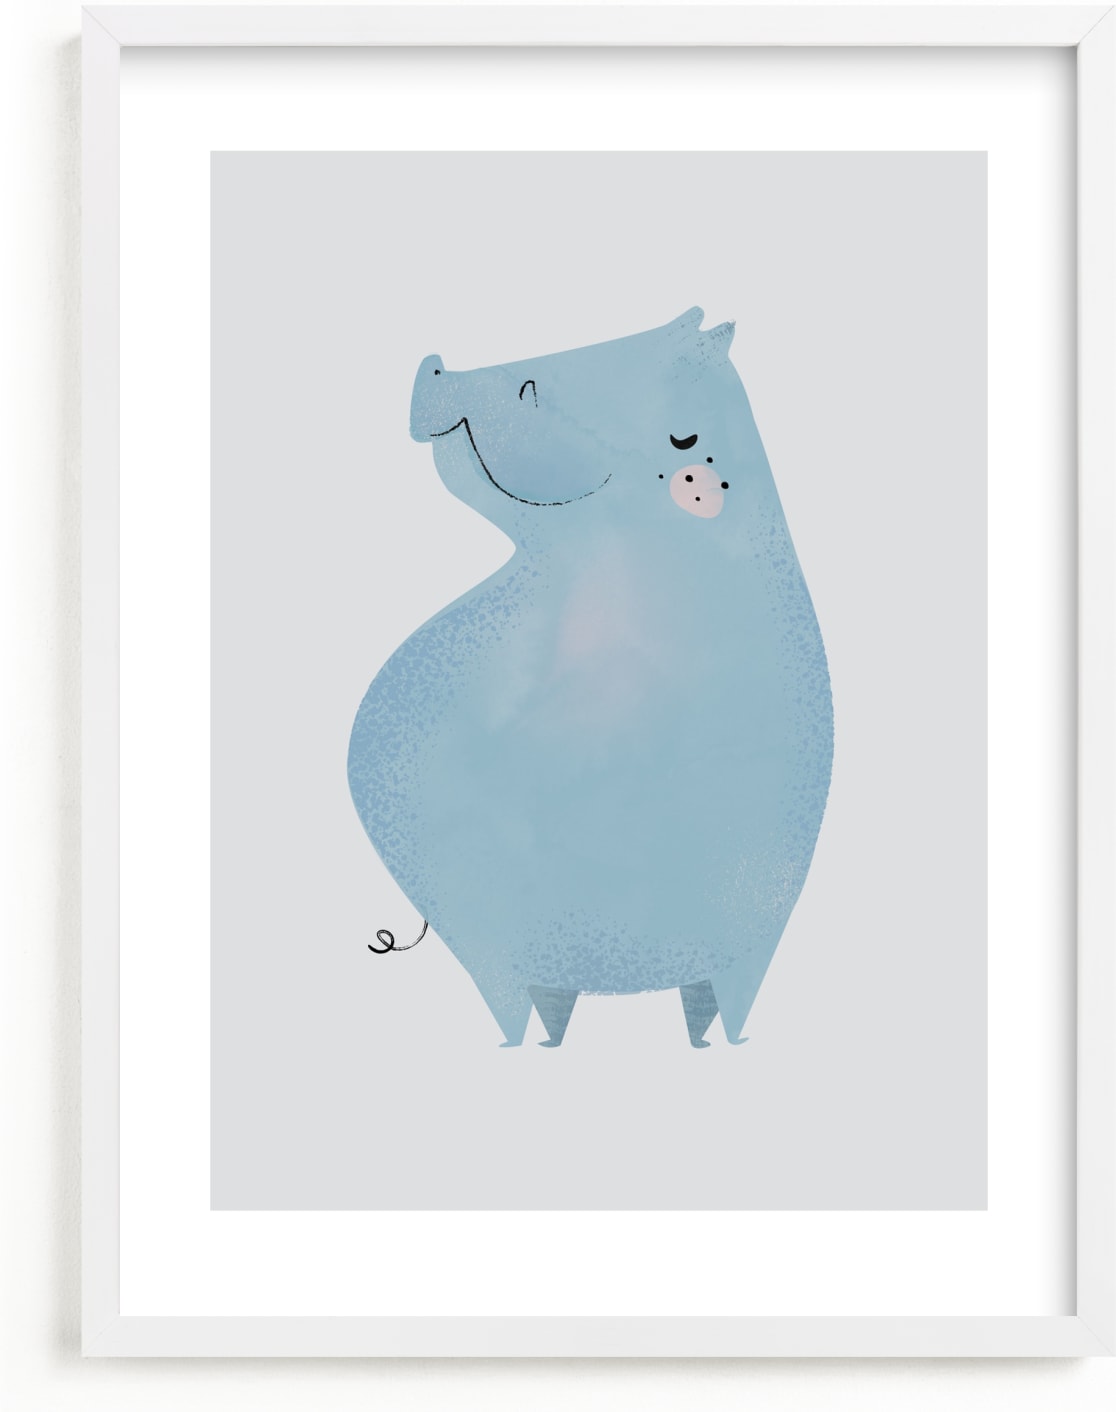 This is a blue kids wall art by Lori Wemple called Hippo.